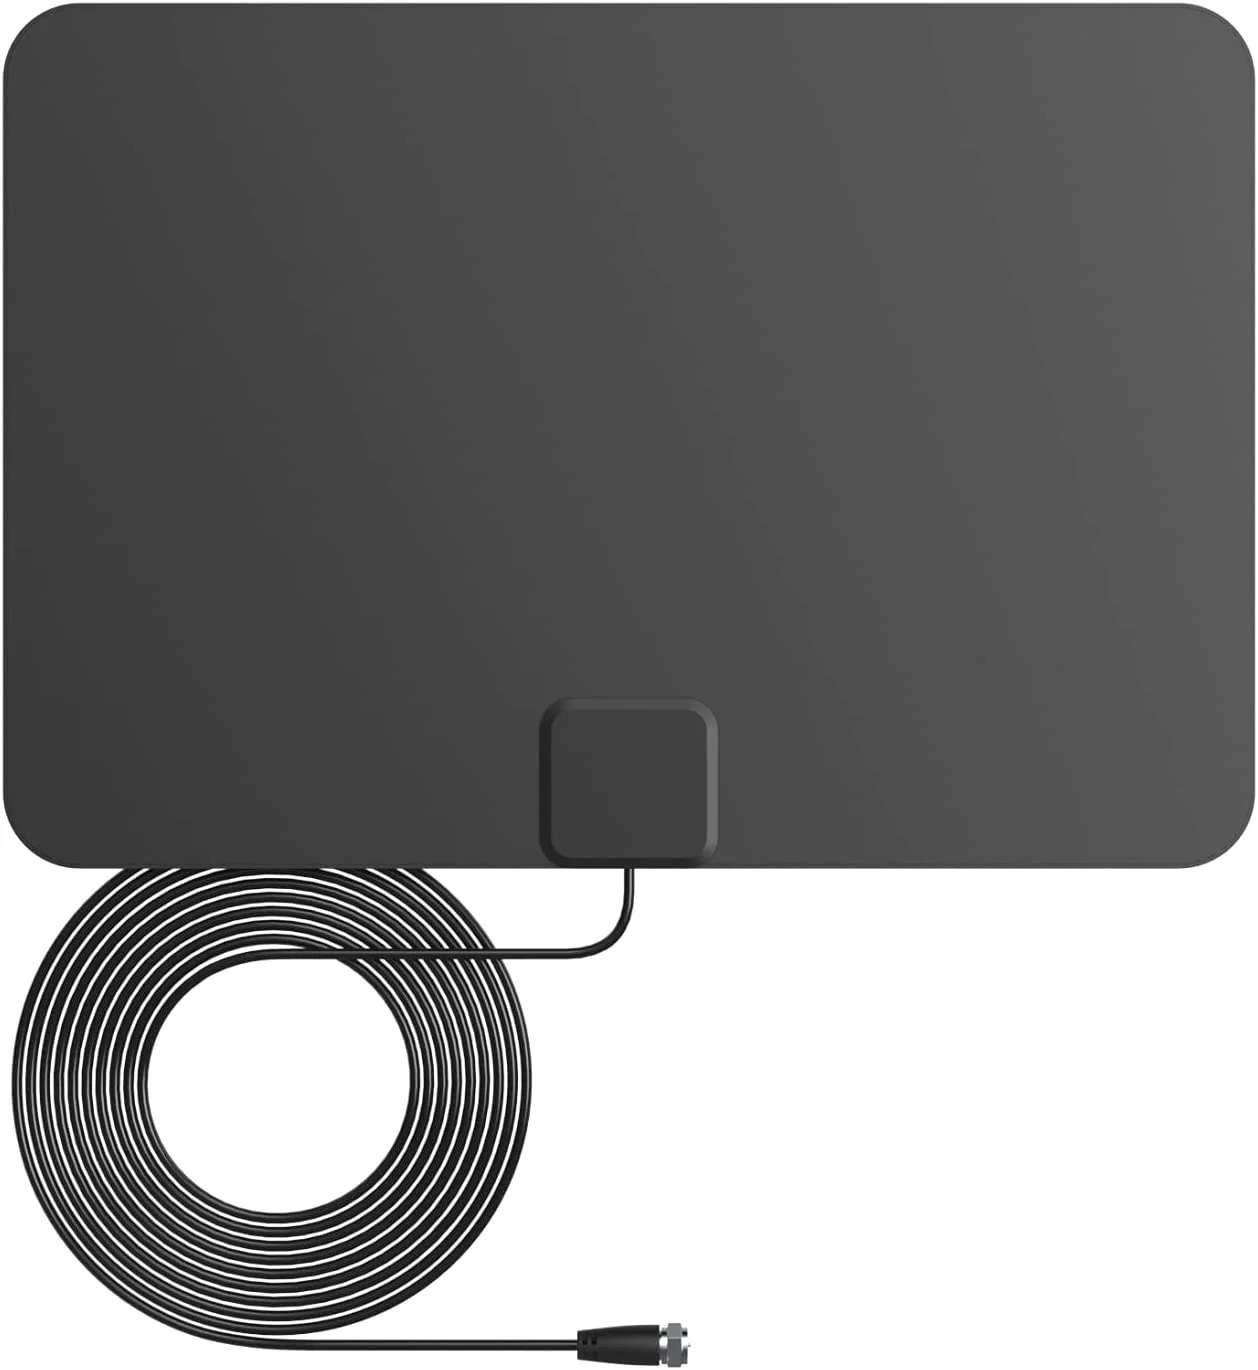 

Amplified HD Digital TV Antenna Long 250 Miles Range Support 4K 8K 1080p Fire tv Stick and All TV's Indoor